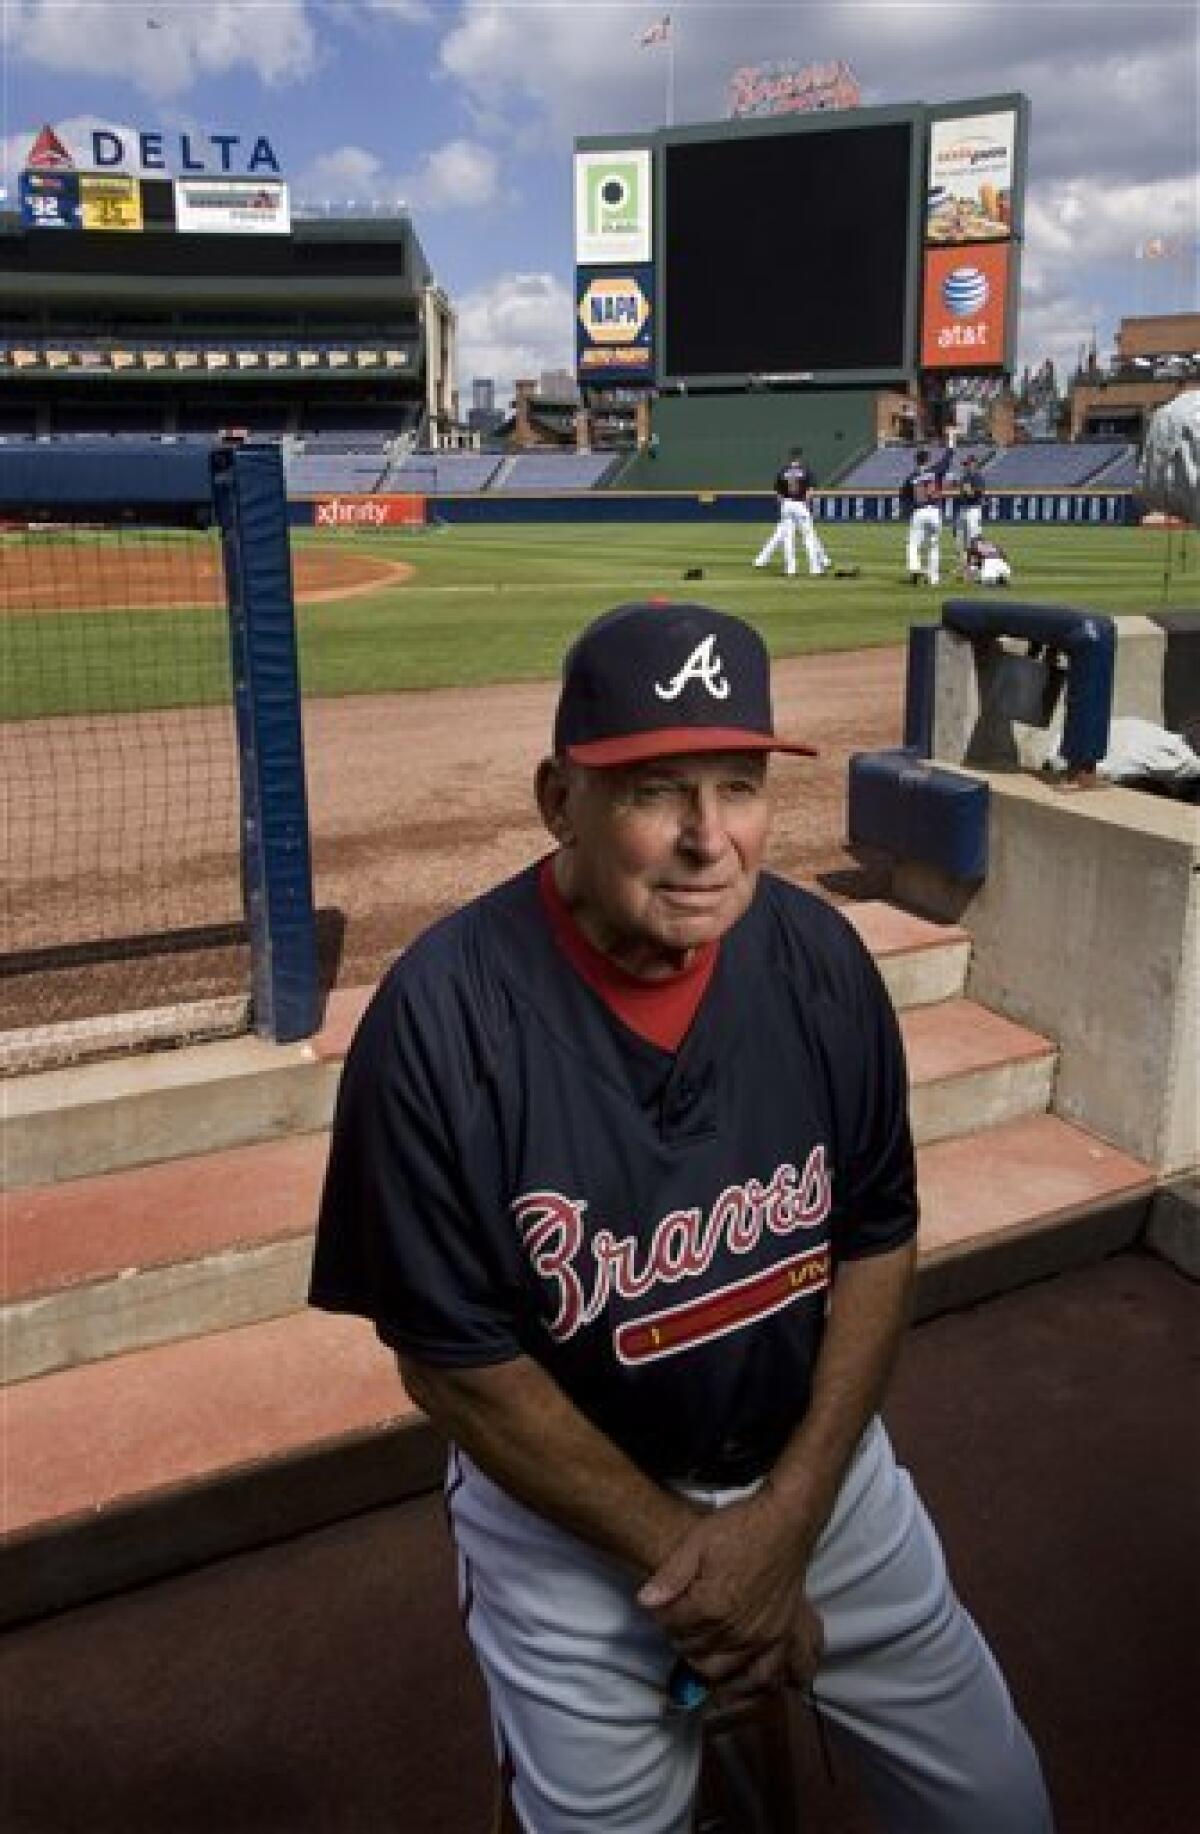 Farewell Ted: Atlanta Braves play final Turner Field game